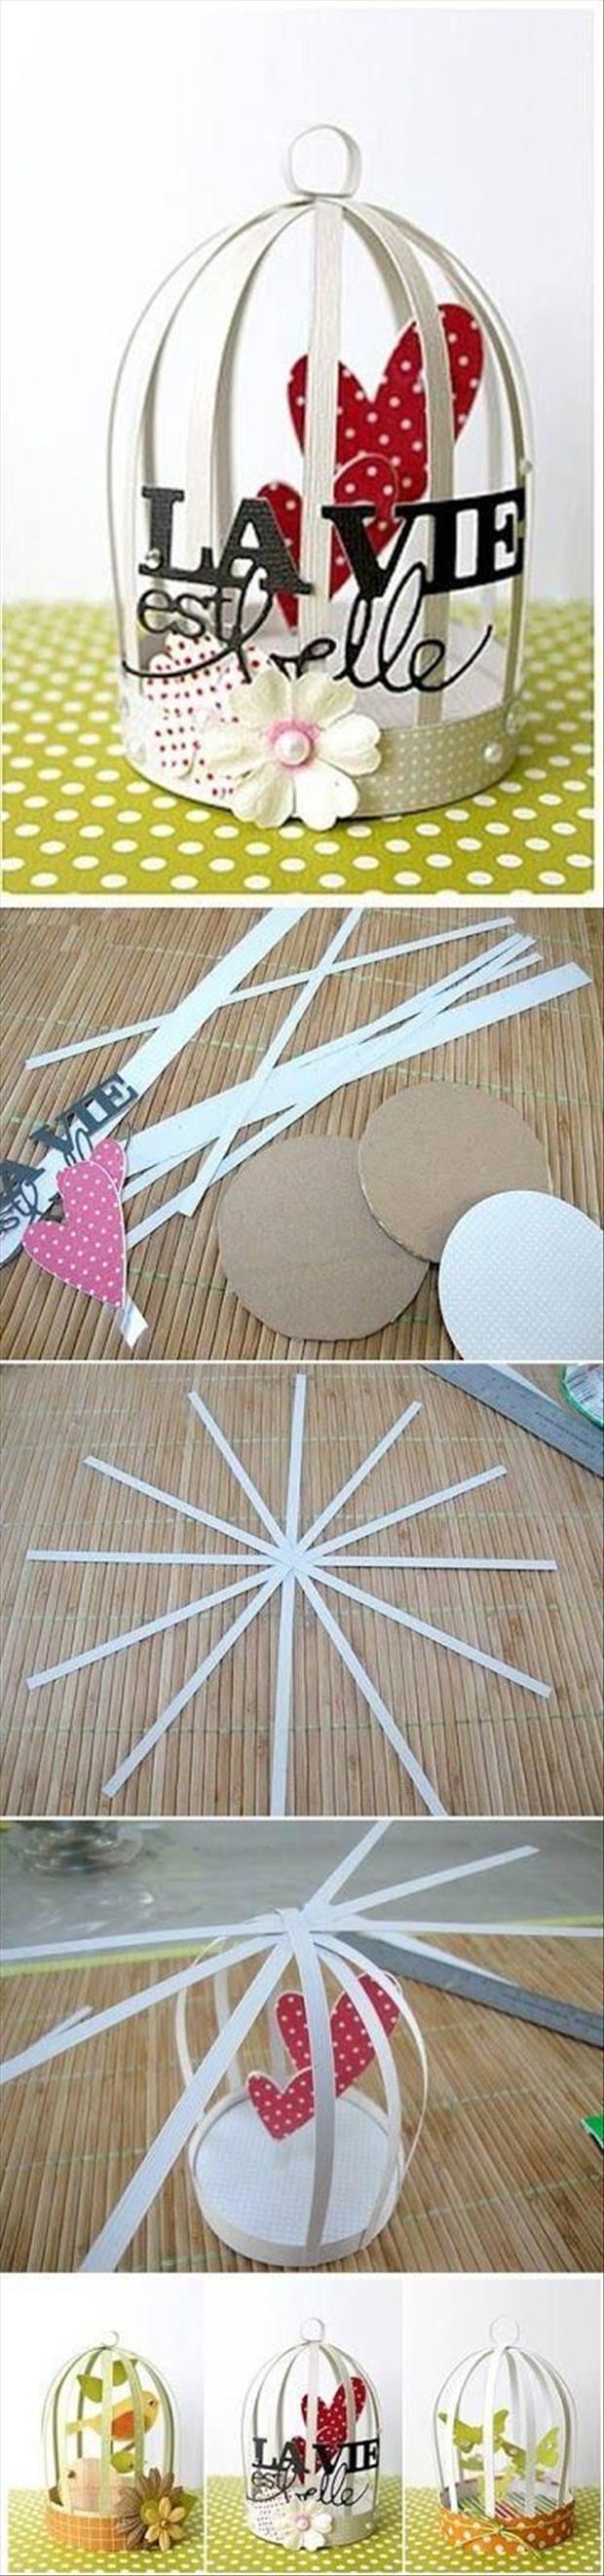 do it yourself crafts (6)